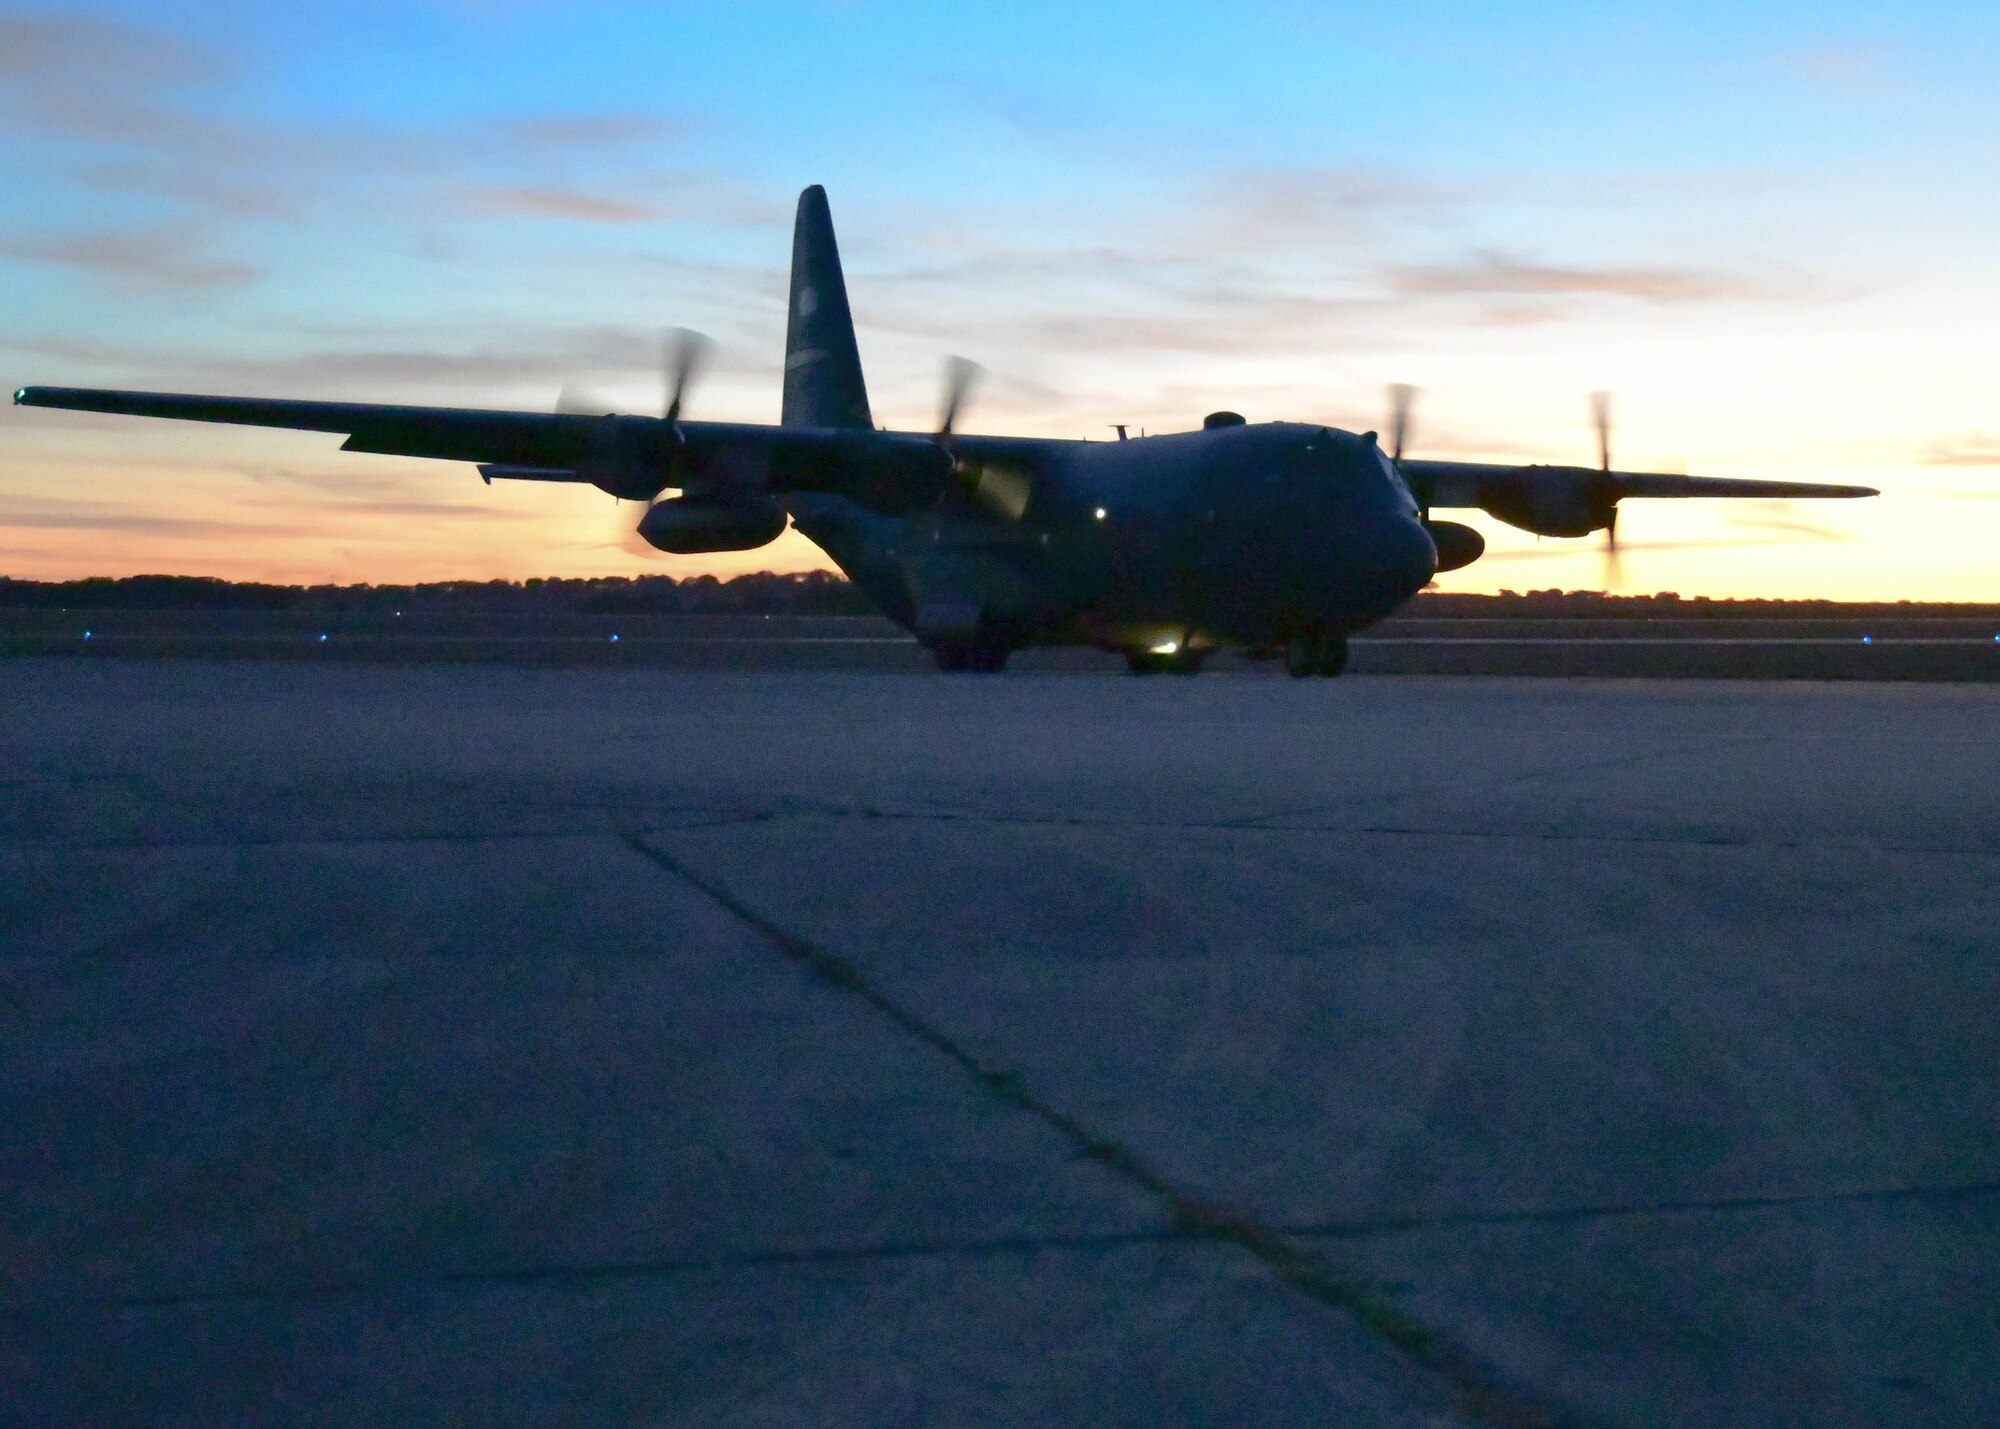 A C-130H3  from the 94th Airlift Wing, Dobbins Air Reserve Base, Georgia, prepares to take off prior to a night flight during Exercise Real Thaw 2019 at Beja Air Base, Portugal, Oct. 2, 2019. Real Thaw is a Portuguese-led multi-lateral flying training exercise where Dobbins provided aerial support. (U.S. Air Force photo/Senior Airman Justin Clayvon)